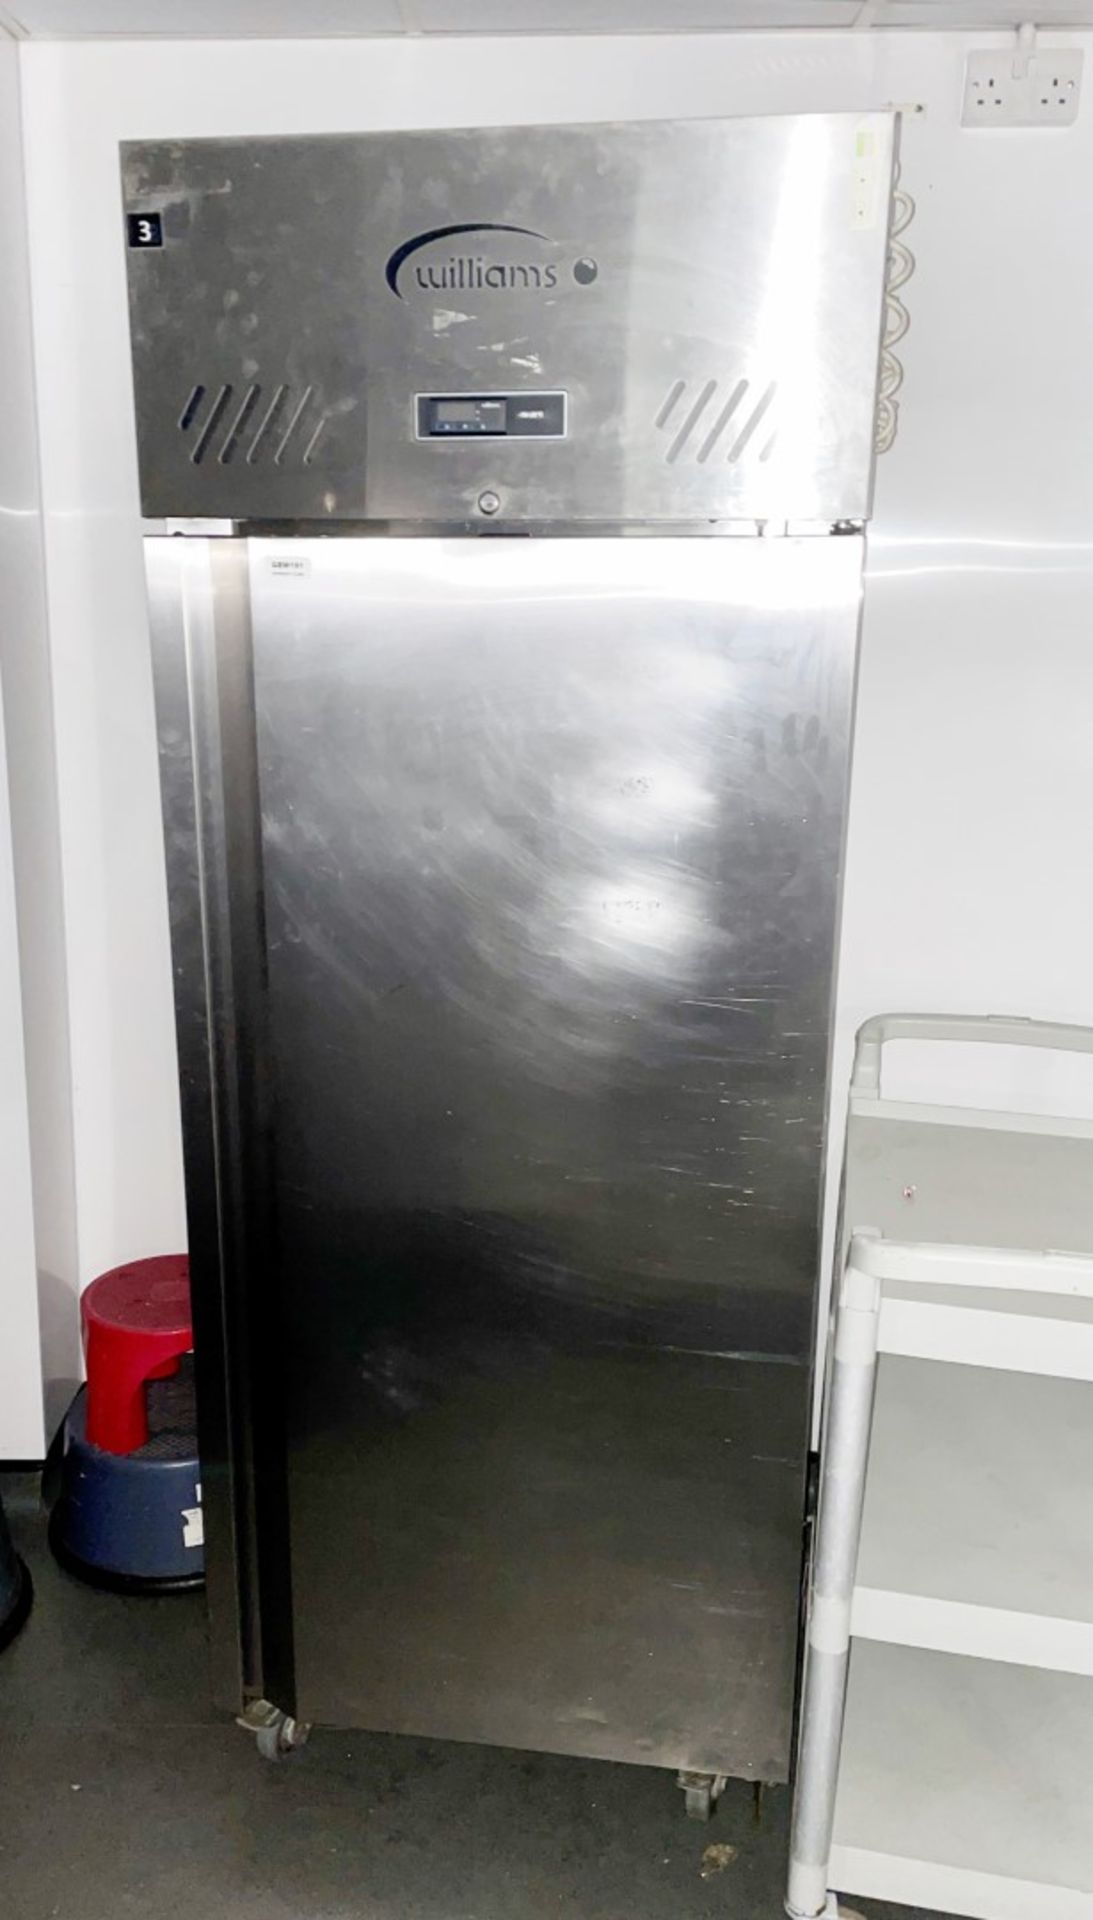 1 x Williams LJ1SA Upright Commercial Freezer With Stainless Steel Exterior - CL670 - Ref: